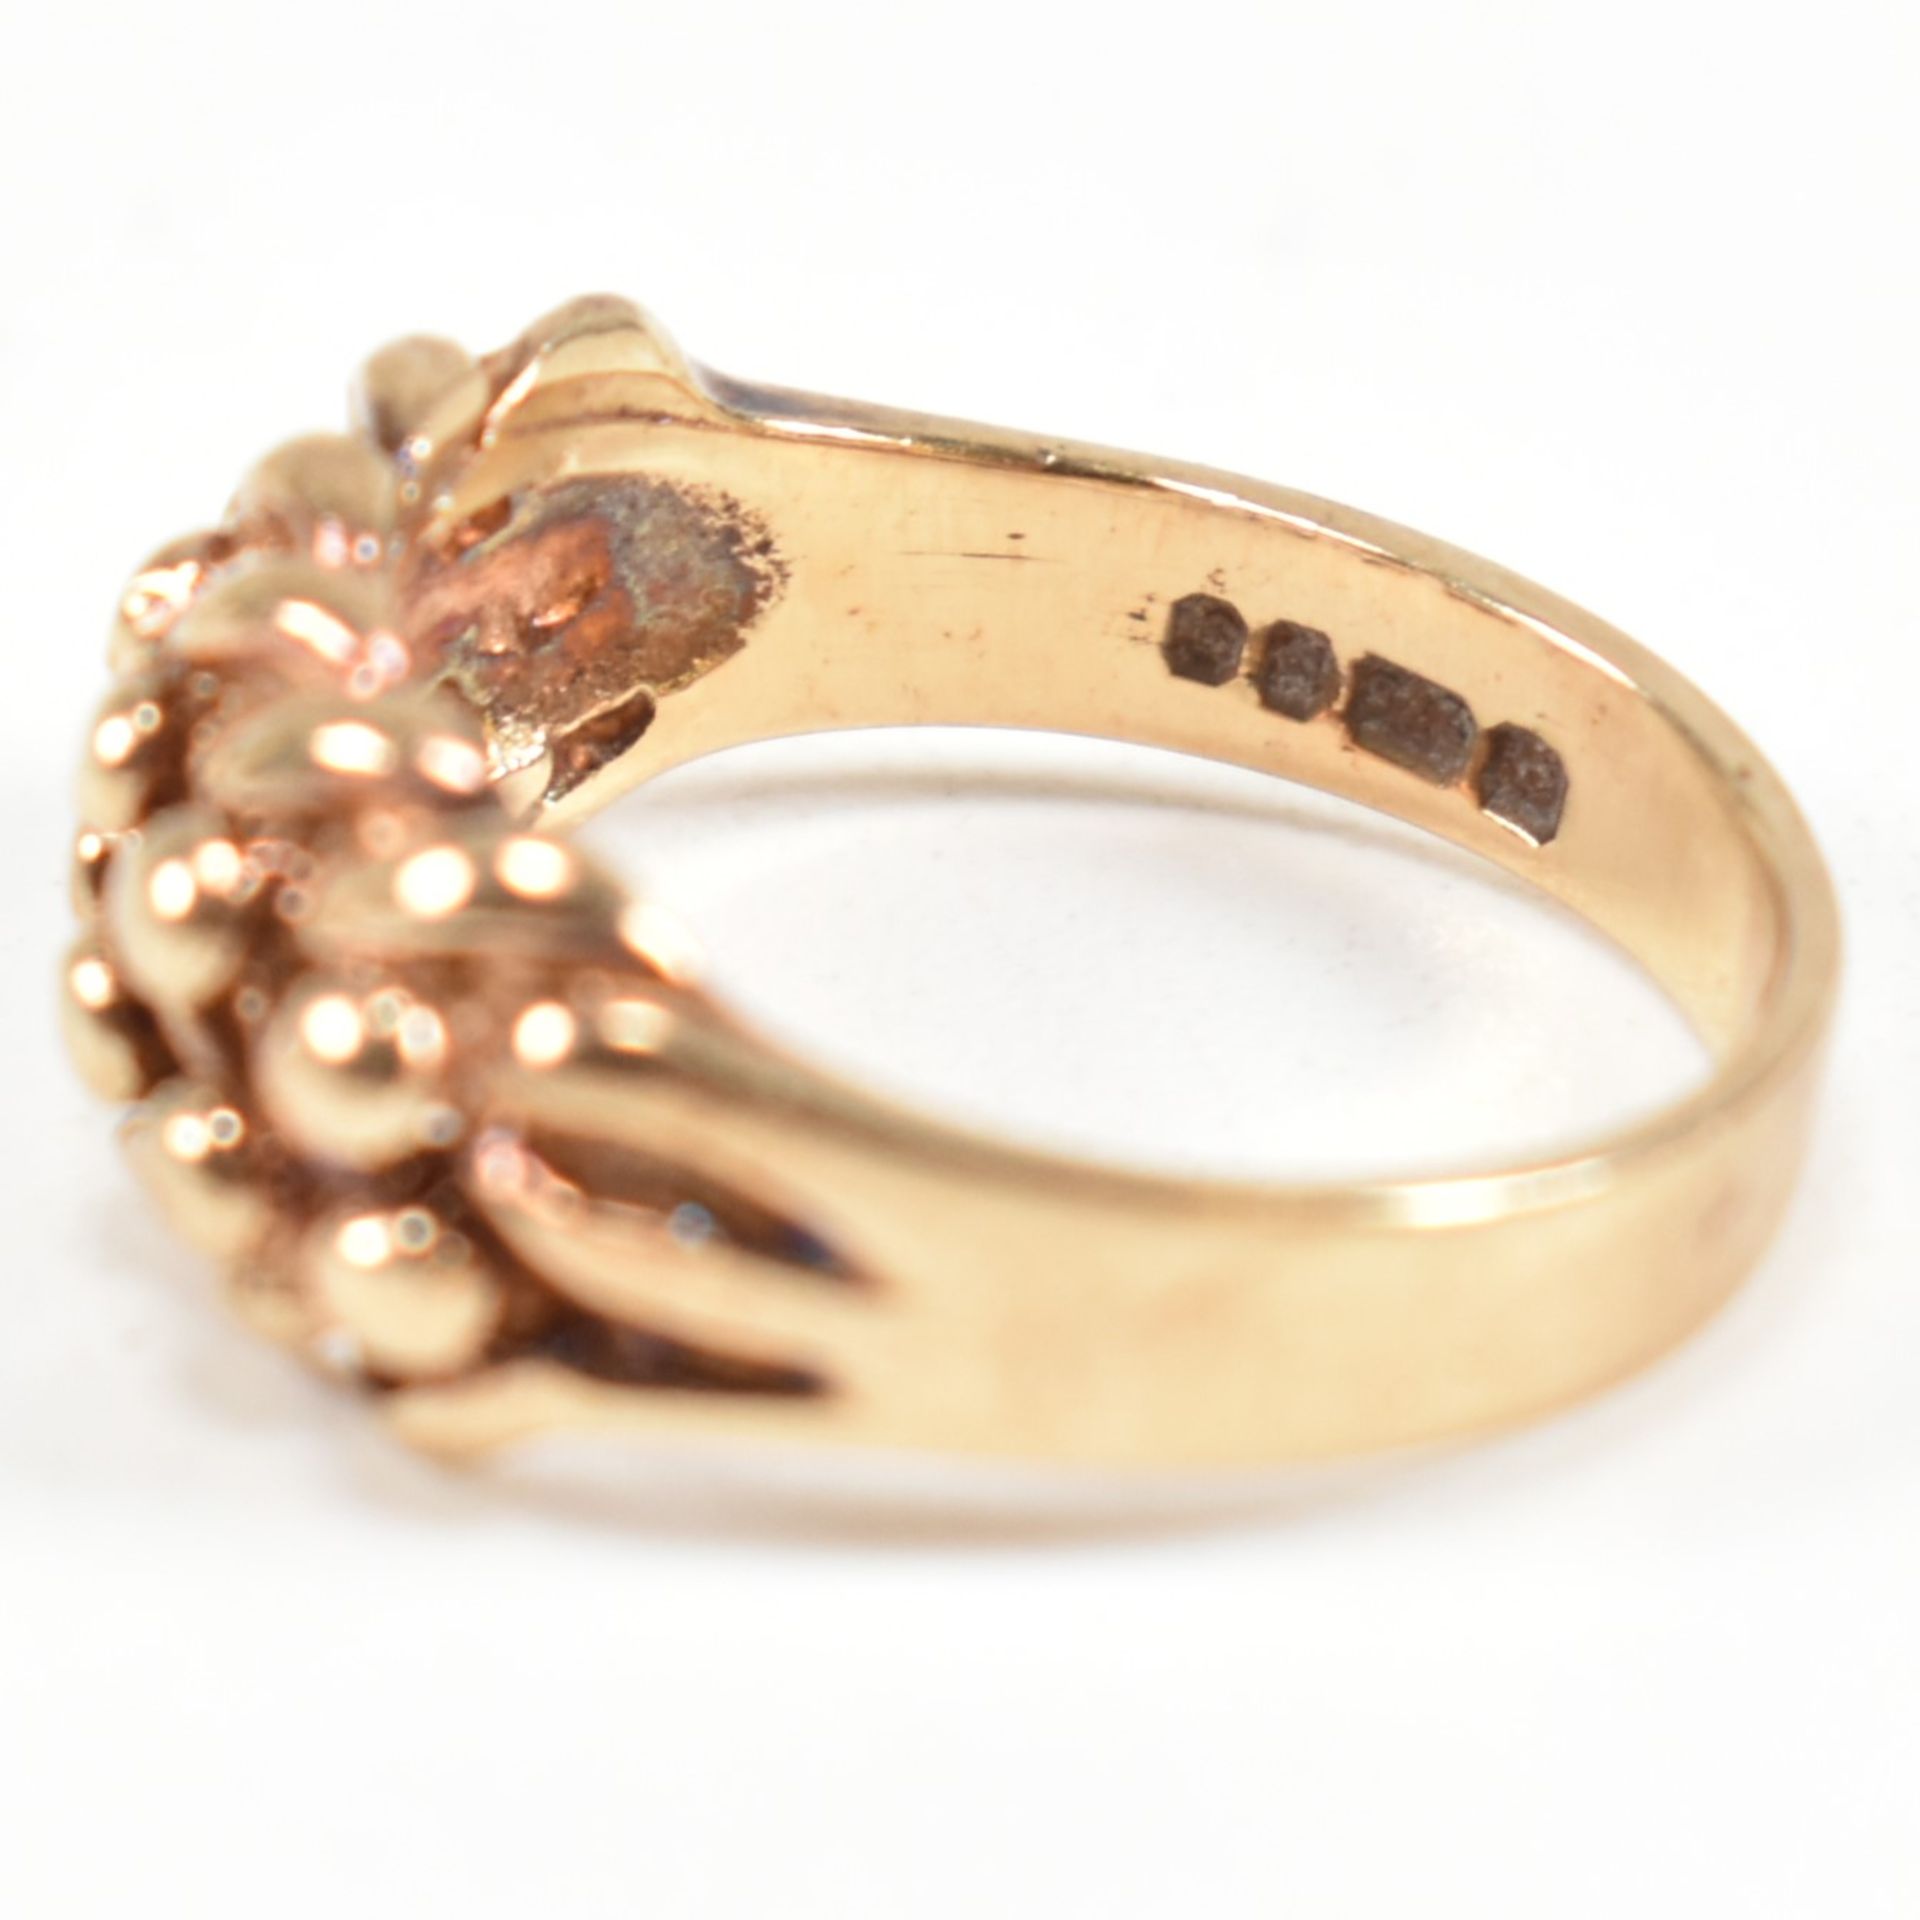 HALLMARKED 9CT GOLD KEEPER RING - Image 9 of 10